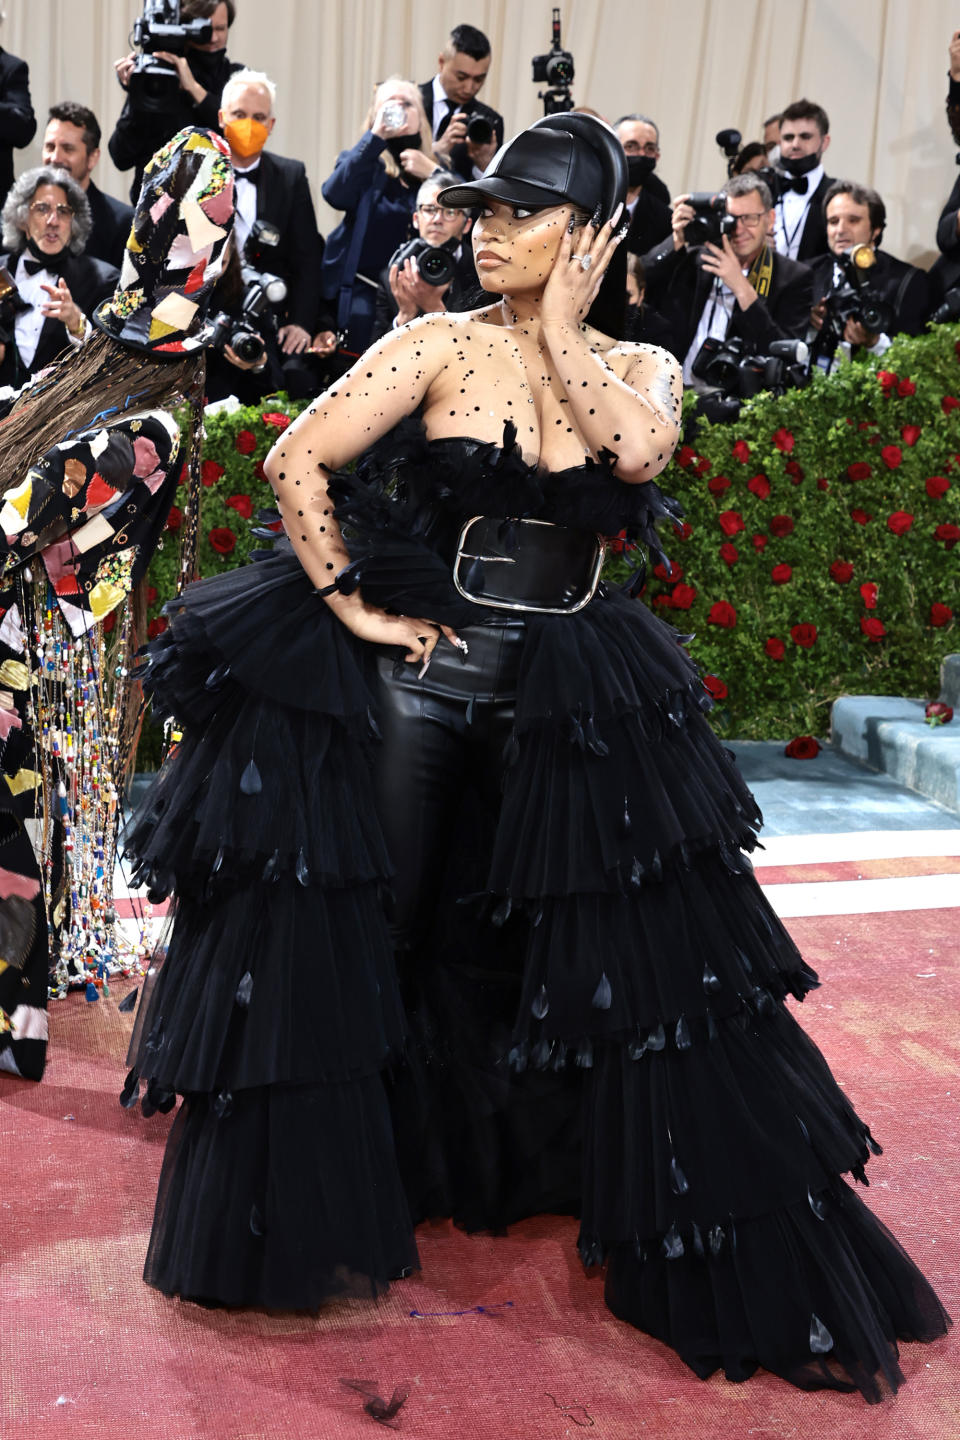 Nicki Minaj attends The 2022 Met Gala Celebrating “In America: An Anthology of Fashion” at The Metropolitan Museum of Art on May 02, 2022 in New York City. - Credit: Jamie McCarthy/Getty Images